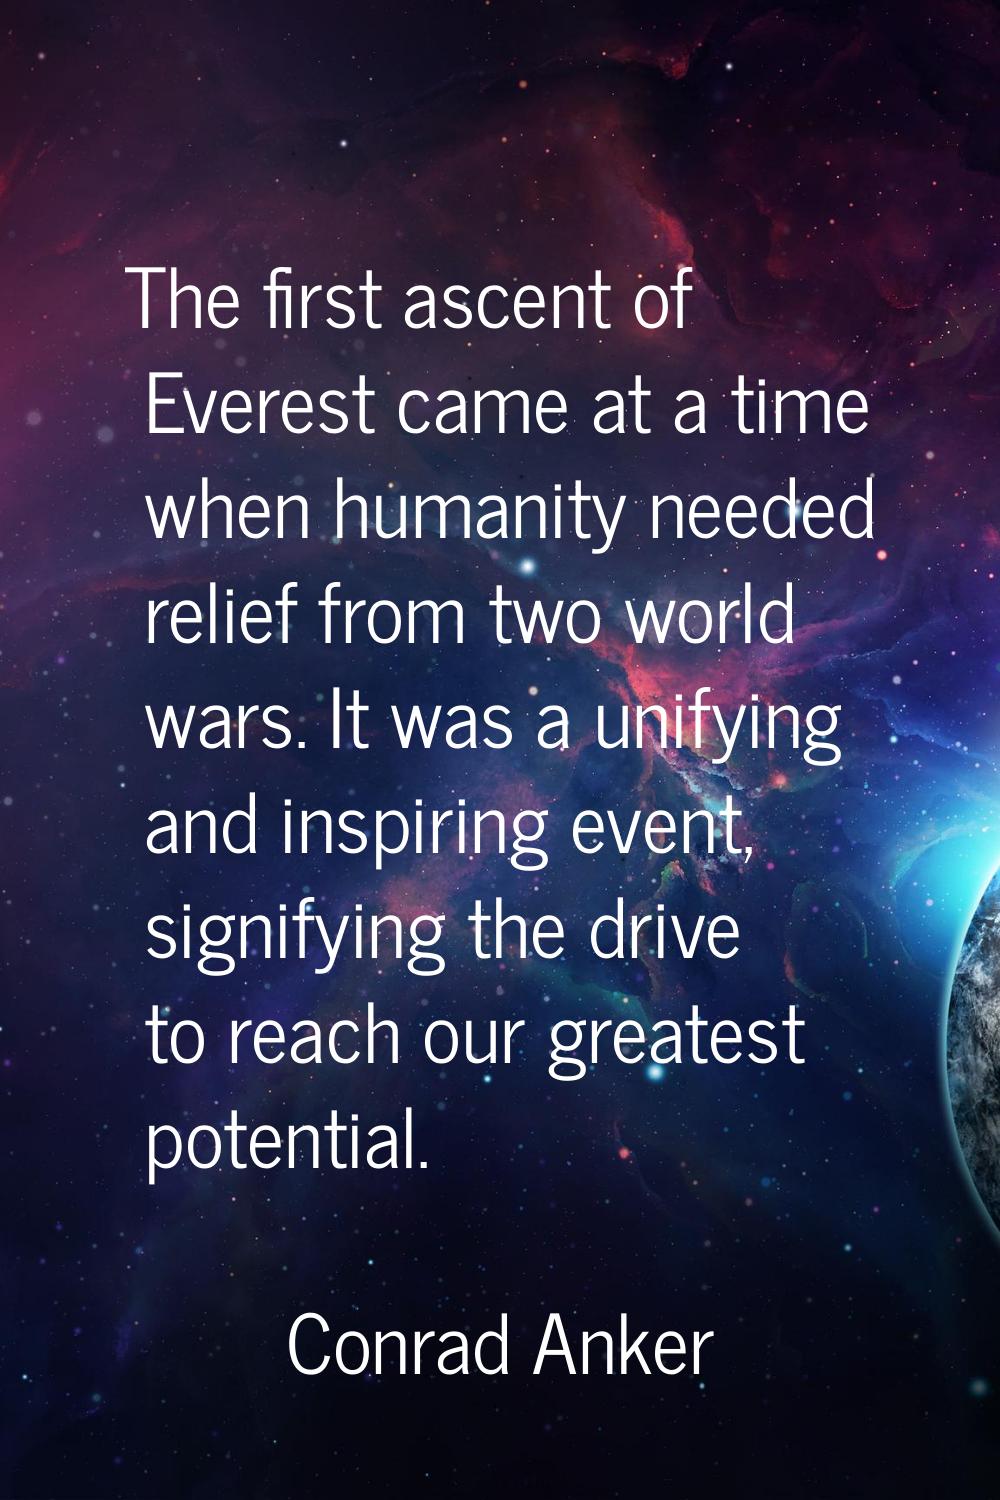 The first ascent of Everest came at a time when humanity needed relief from two world wars. It was 